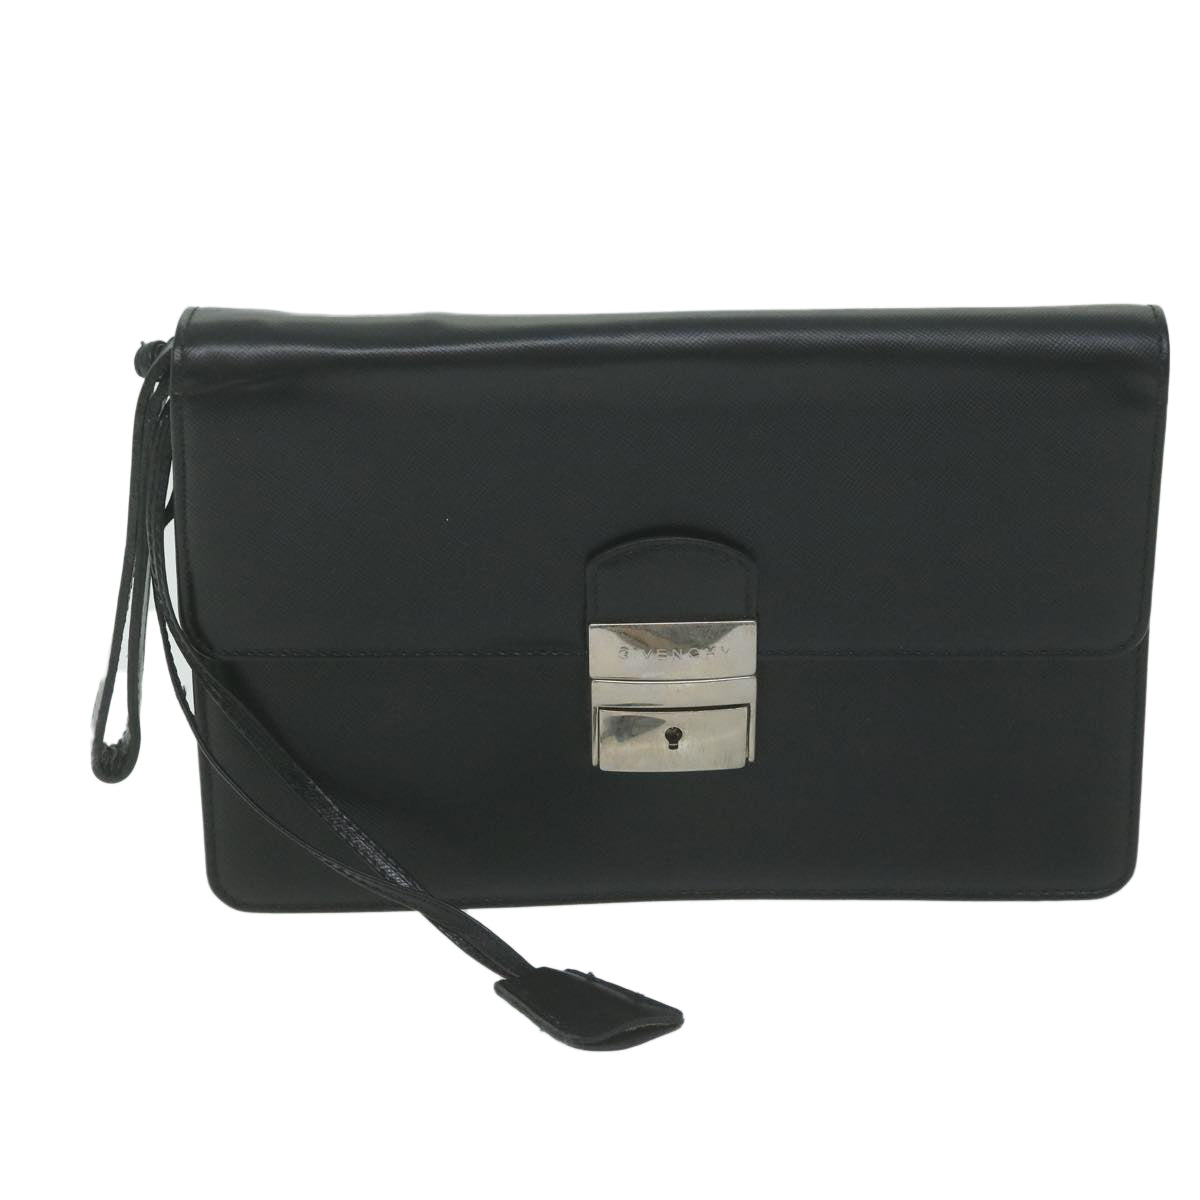 GIVENCHY Clutch Bag Leather Black Auth bs11875